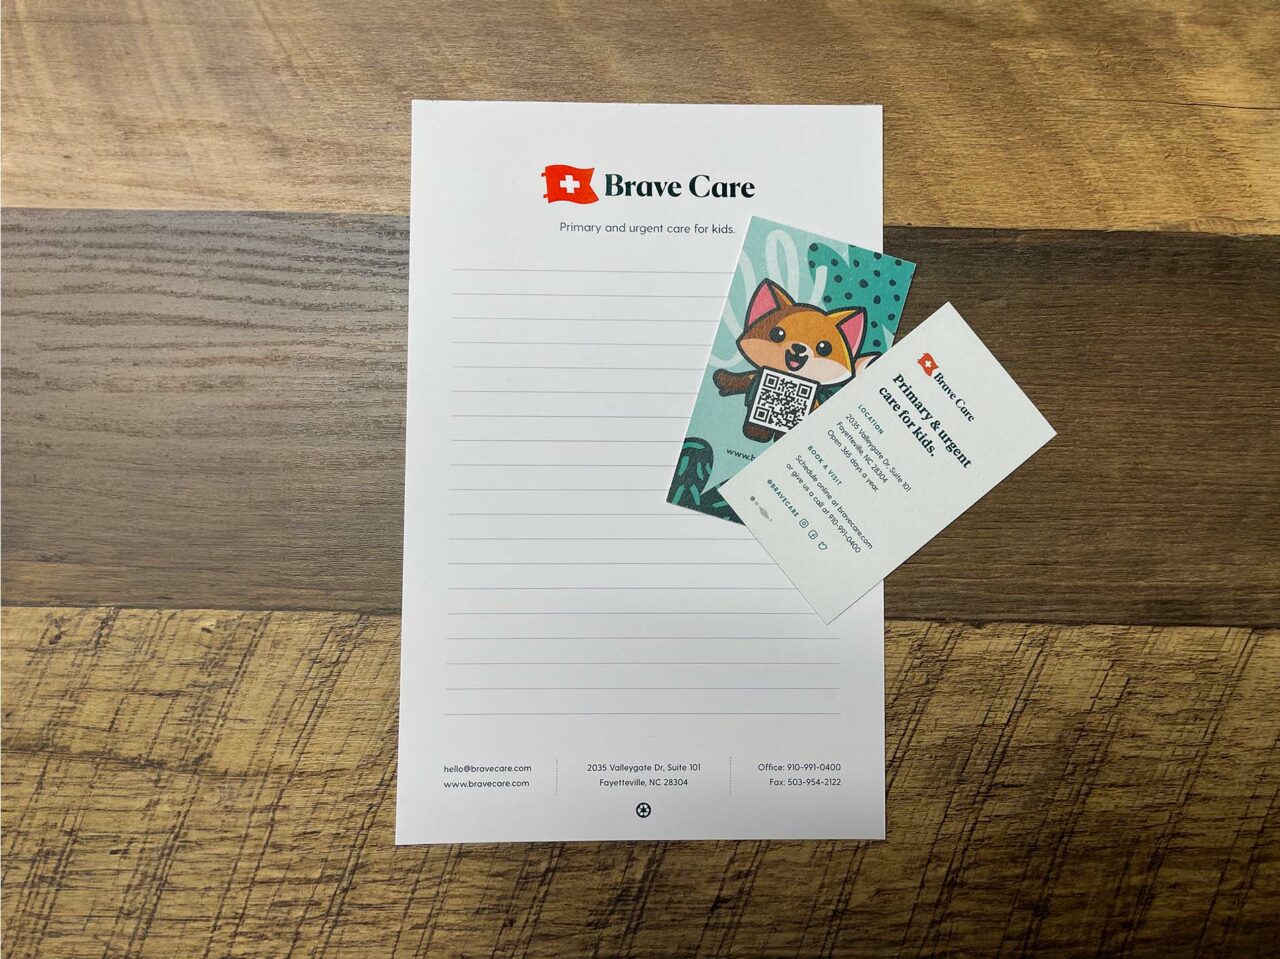 Example of Morel's print capabilities, showing a branded notepad and business cards for their client, Brave Care.